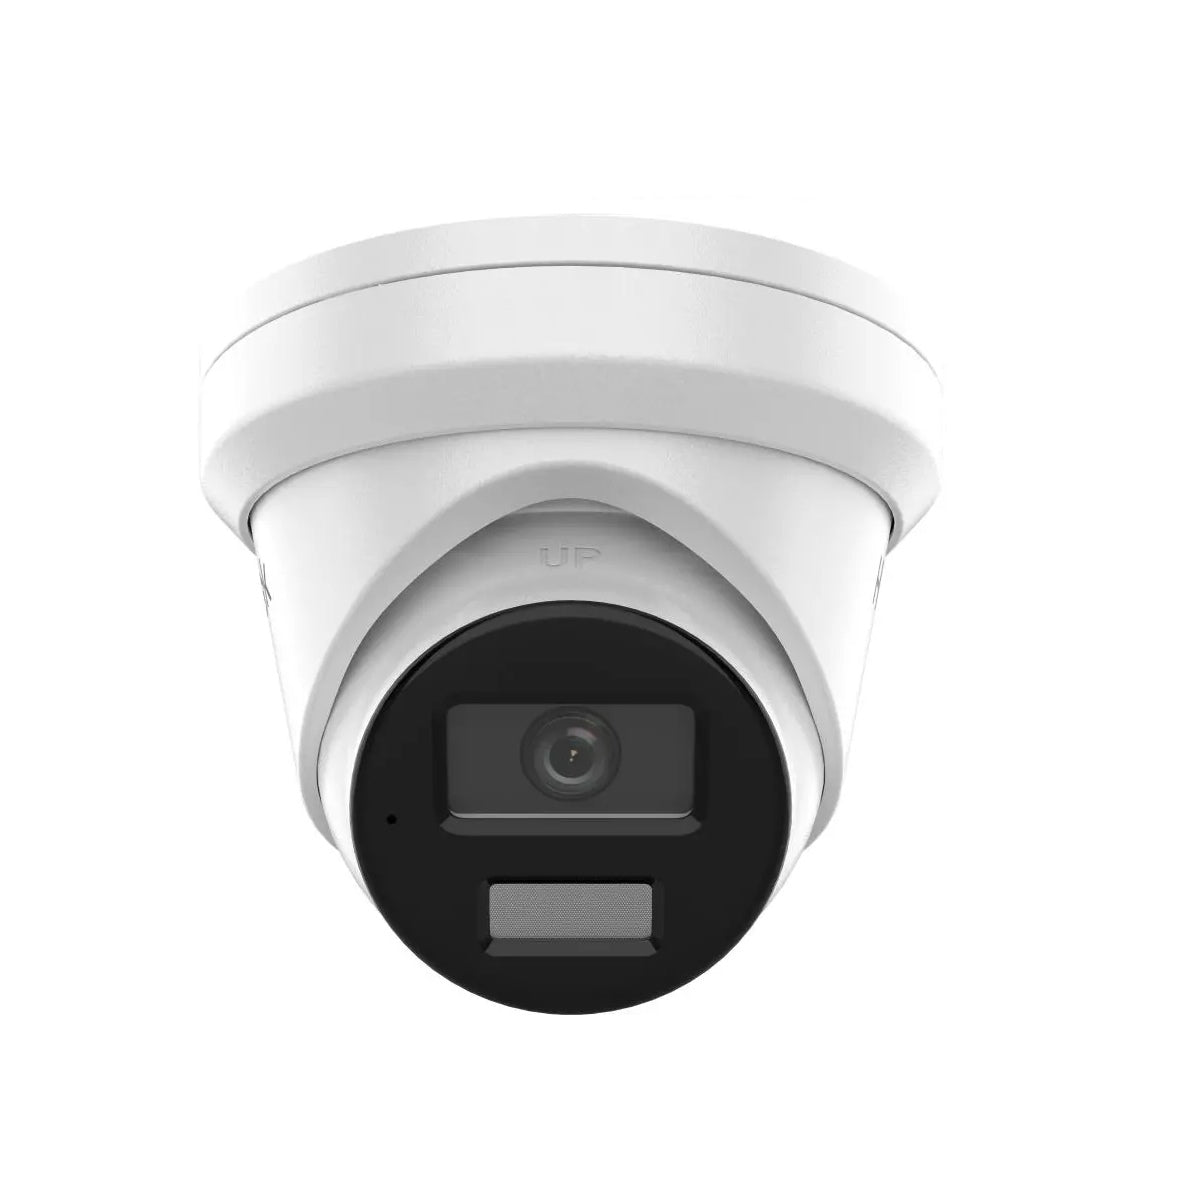 IPC-T259H-MU 2.8mm HiLook 5MP ColorVu IP POE network turret camera with 30m LED, built-in mic